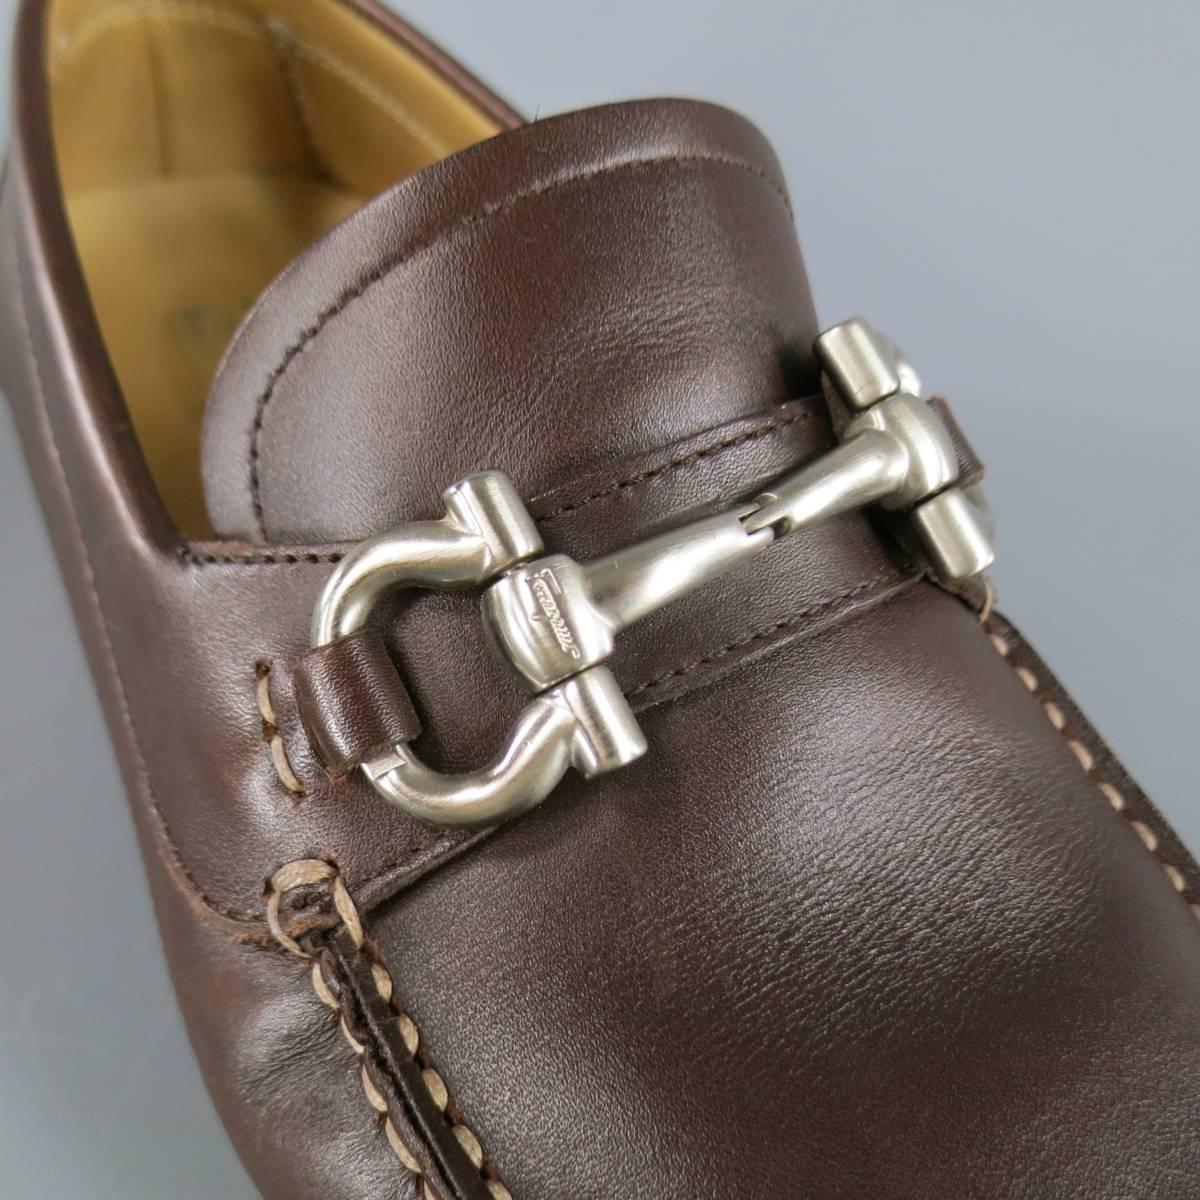 SALVATORE FERRAGAMO Loafer consists of leather material in a brown color tone. Designed in a moc.toe square front with contrast stitching and gancini bit at the upper. Detailed with rubber sole. Made in Italy.
Retails at $475.00.
 
Excellent